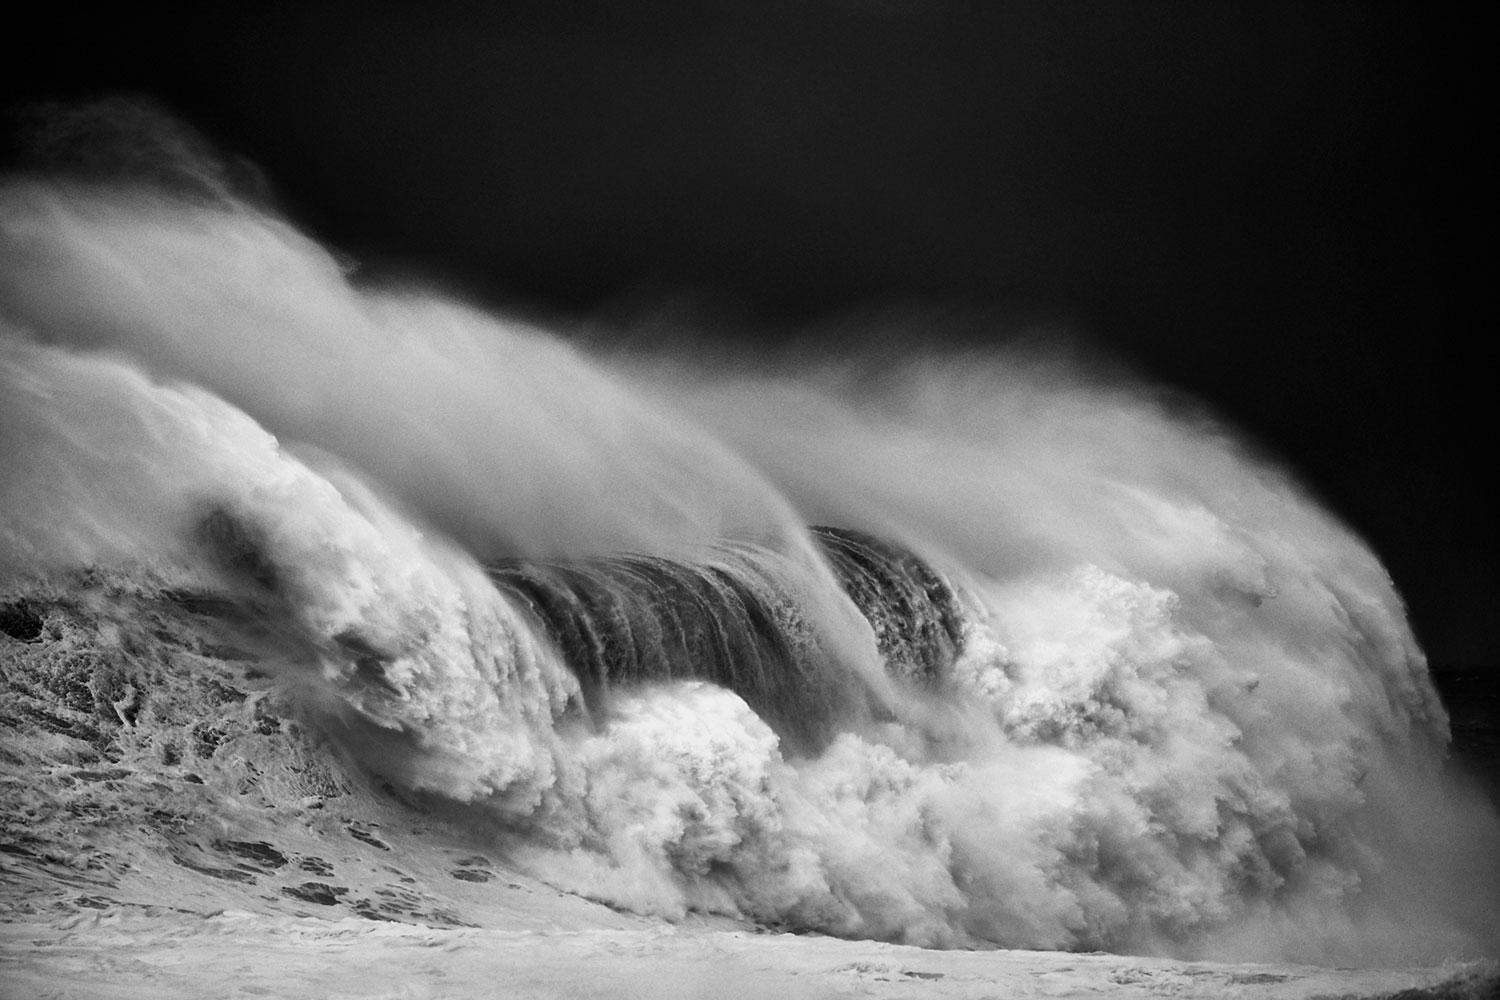 Abstract Photograph Alessandro Puccinelli - Nazare, Portugal, Vagues, Photographie de paysage marin